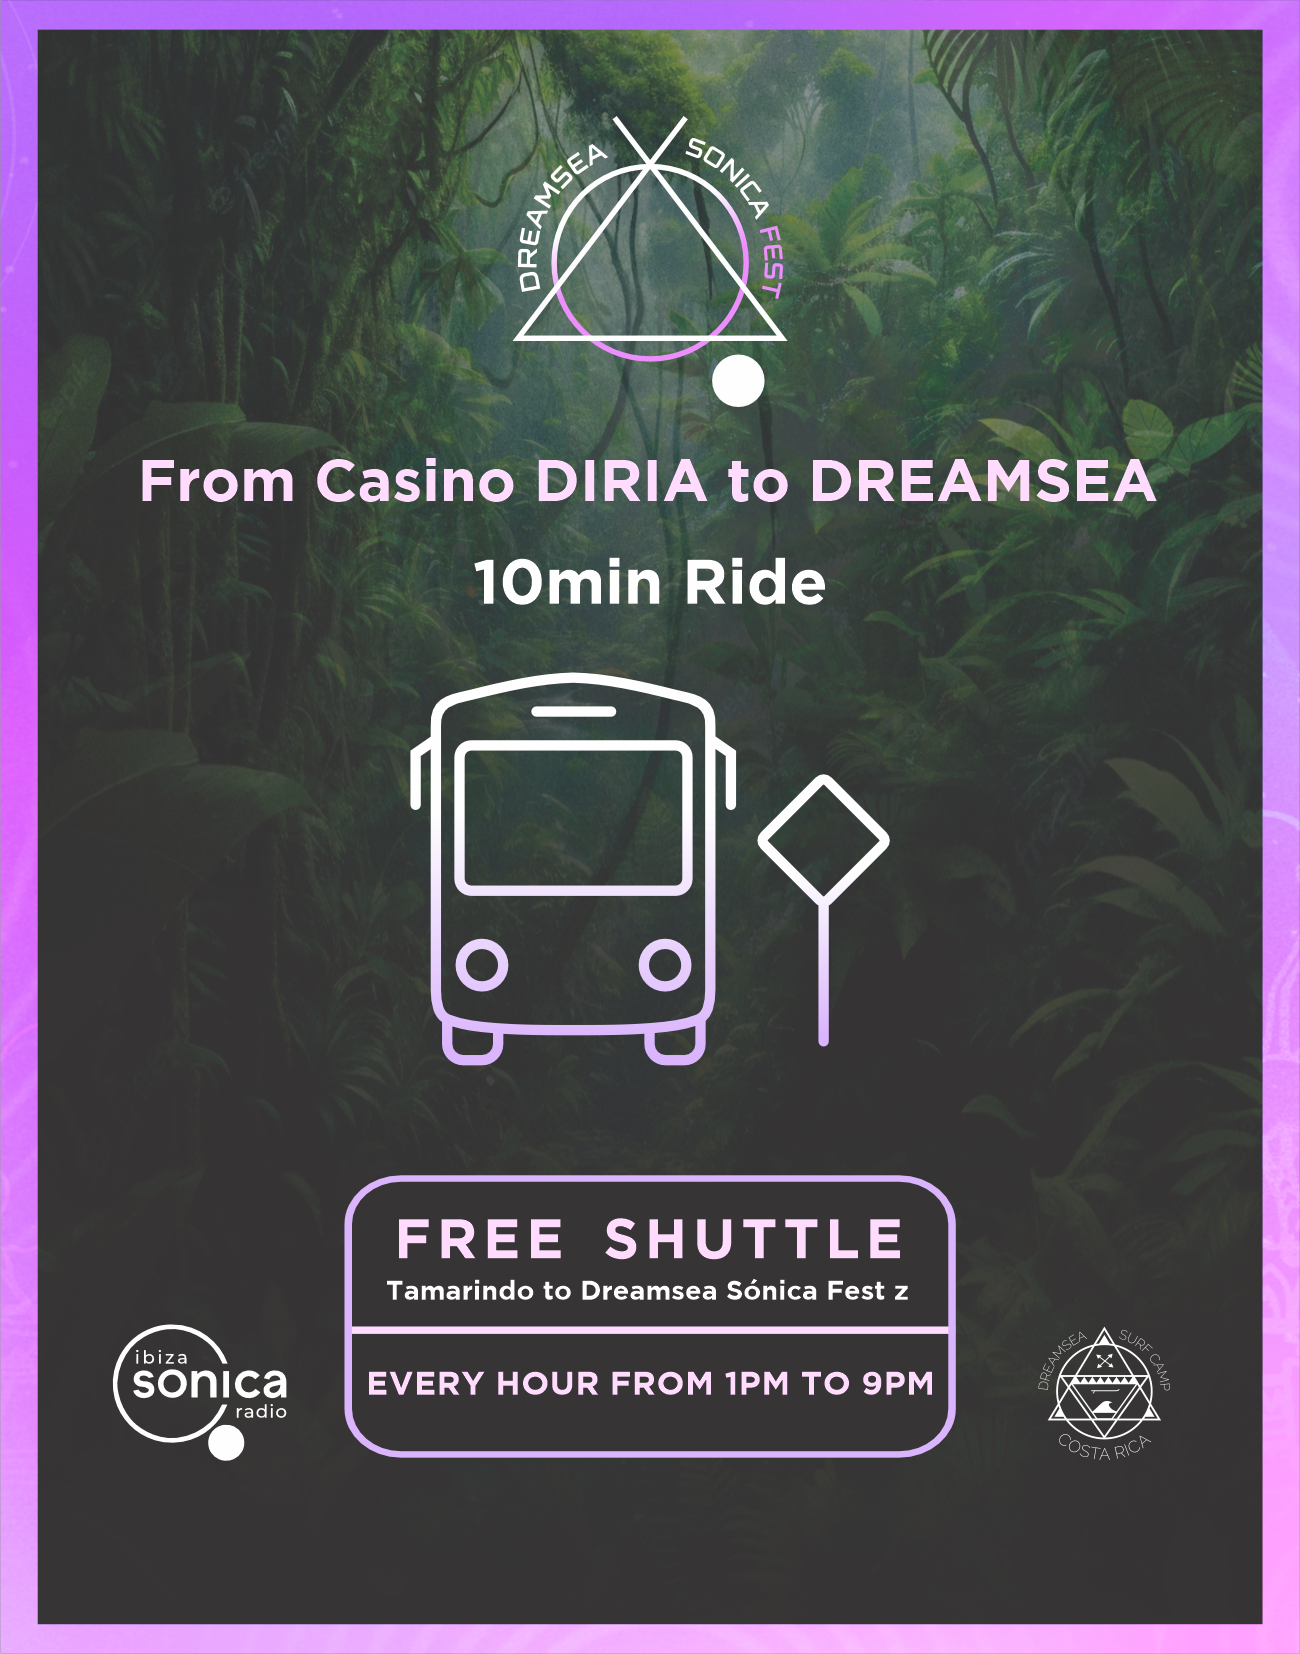 Dreamsea Costa Rica | Sonica Fest | Image | Image of a sign showing information about a free shuttle to the venue.